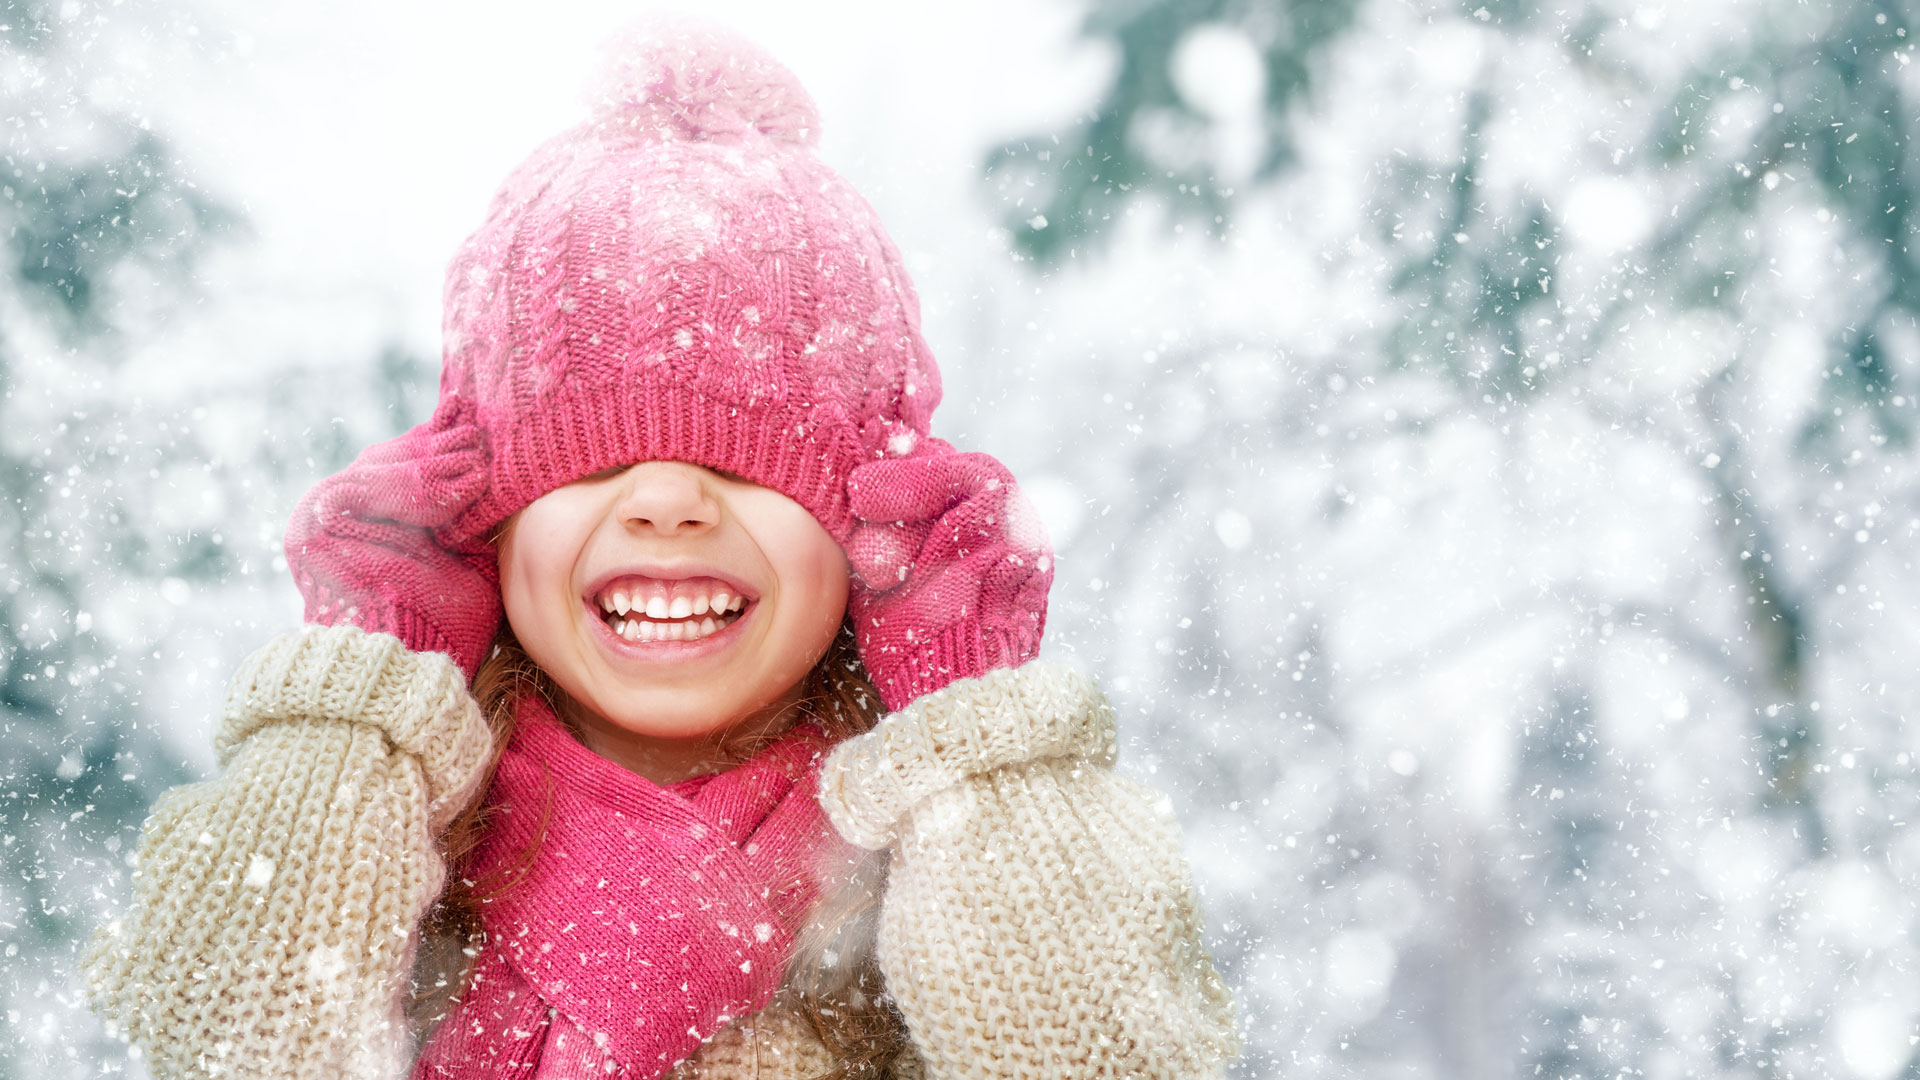 What Should Consider While Buying Winter Wear For Kids?